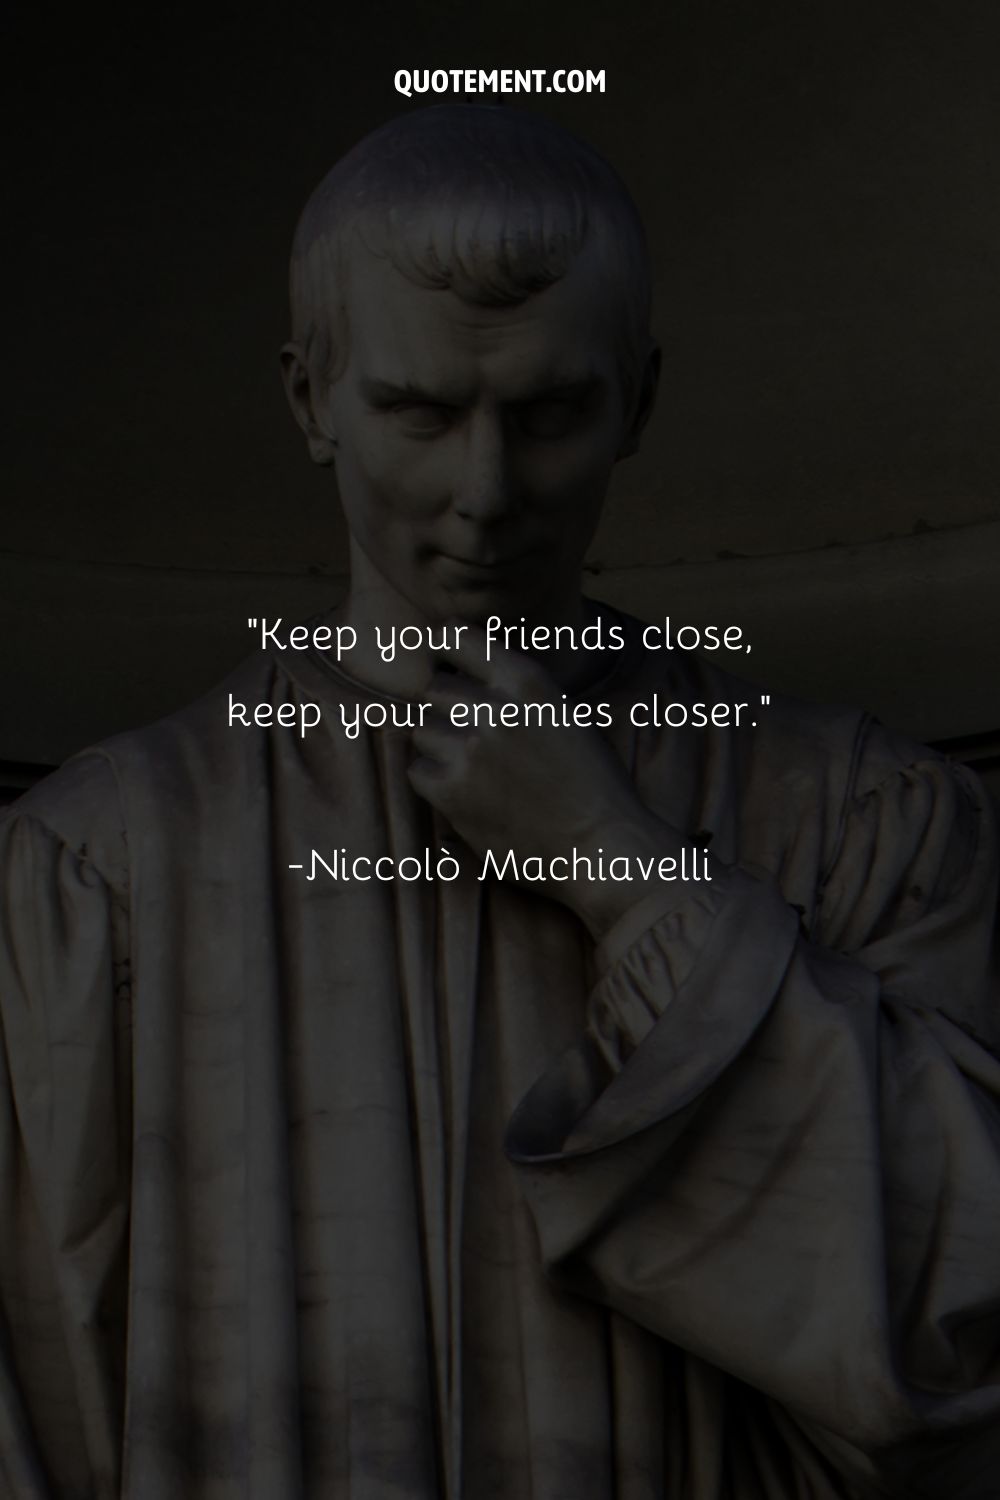 Keep your friends close, keep your enemies closer